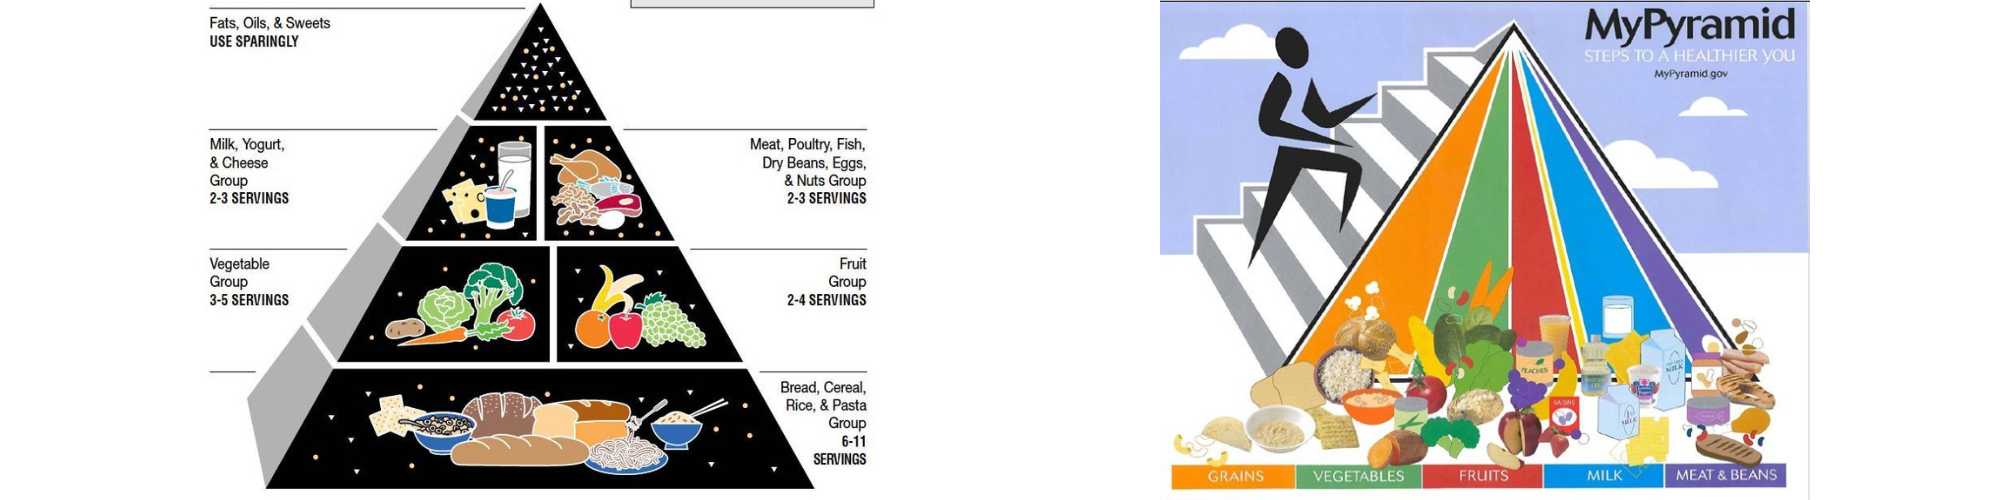 food guide pyramid and mypyramid illustrations